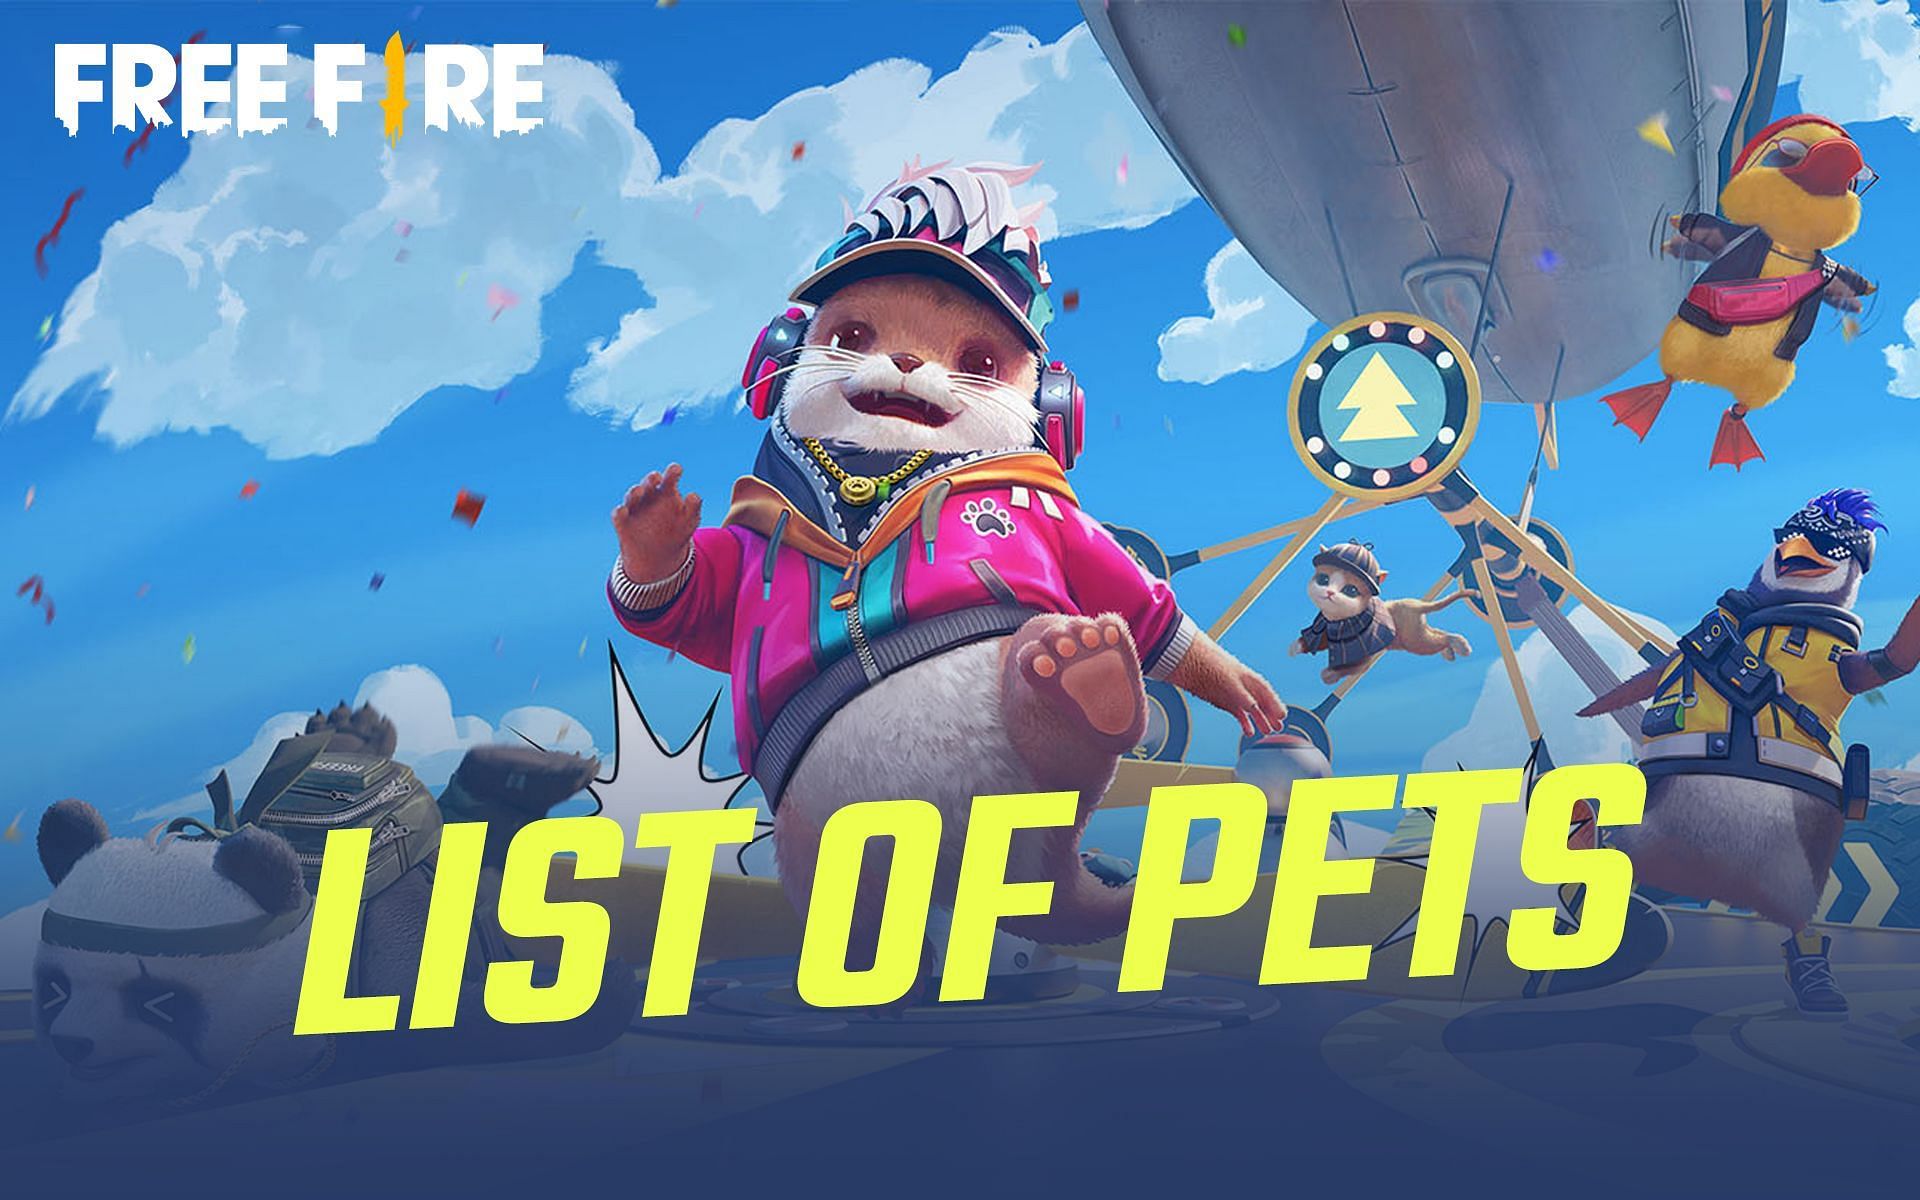 Several Free Fire pets have been added by the developers in 2021 (Image via Sportskeeda)